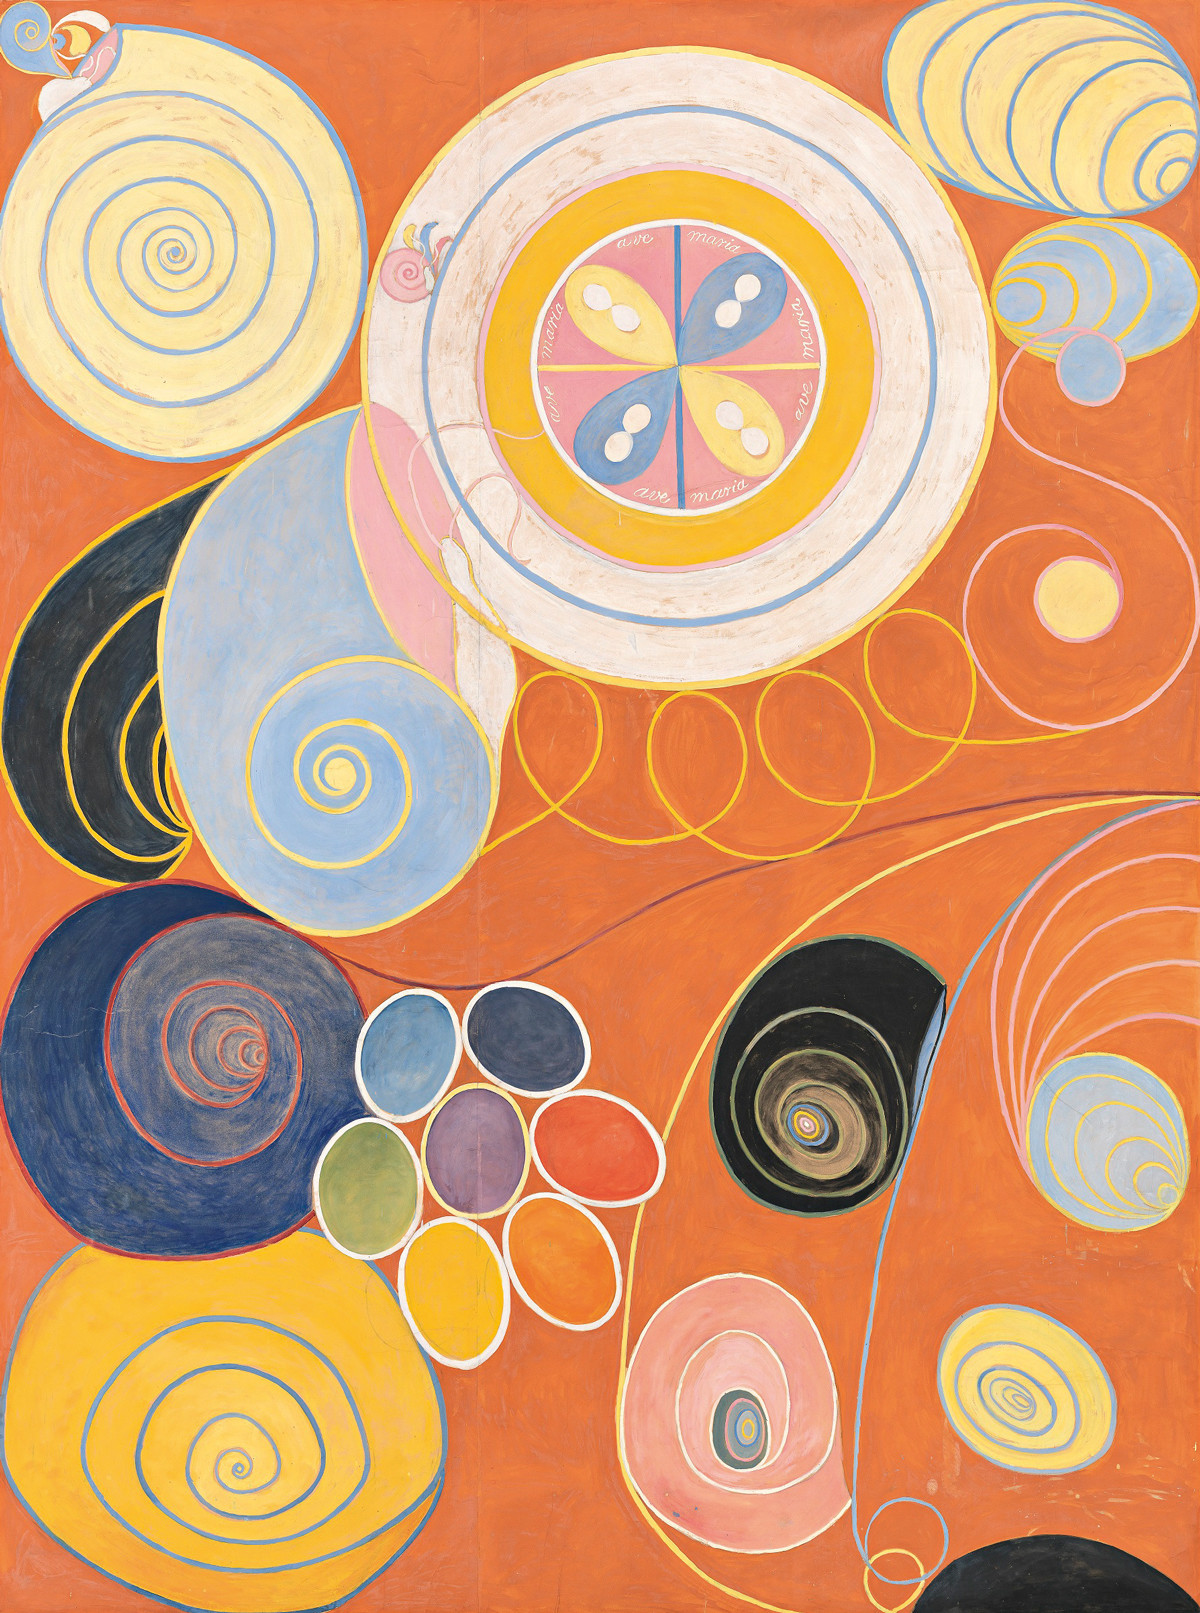 Who Painted the First Abstract Painting?: Wassily Kandinsky? Hilma af Klint? Or Another Contender? Artes & contextos hilma af klint group iv no 3 the ten largest youth 1907 trivium art history